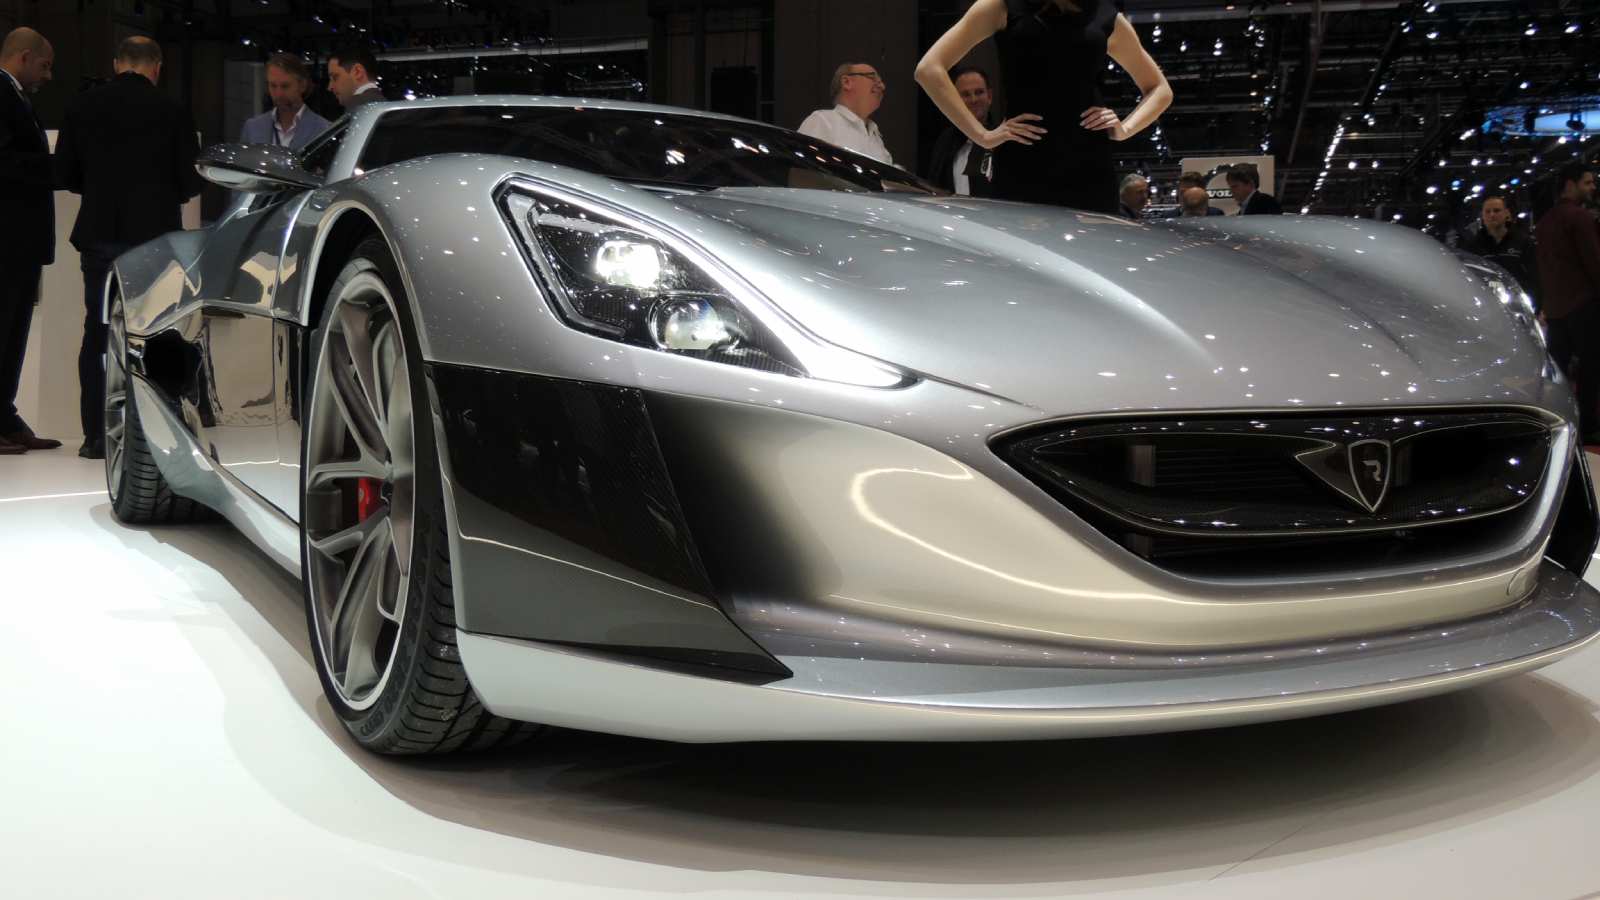 10 of the fastest electric cars the world has to offer